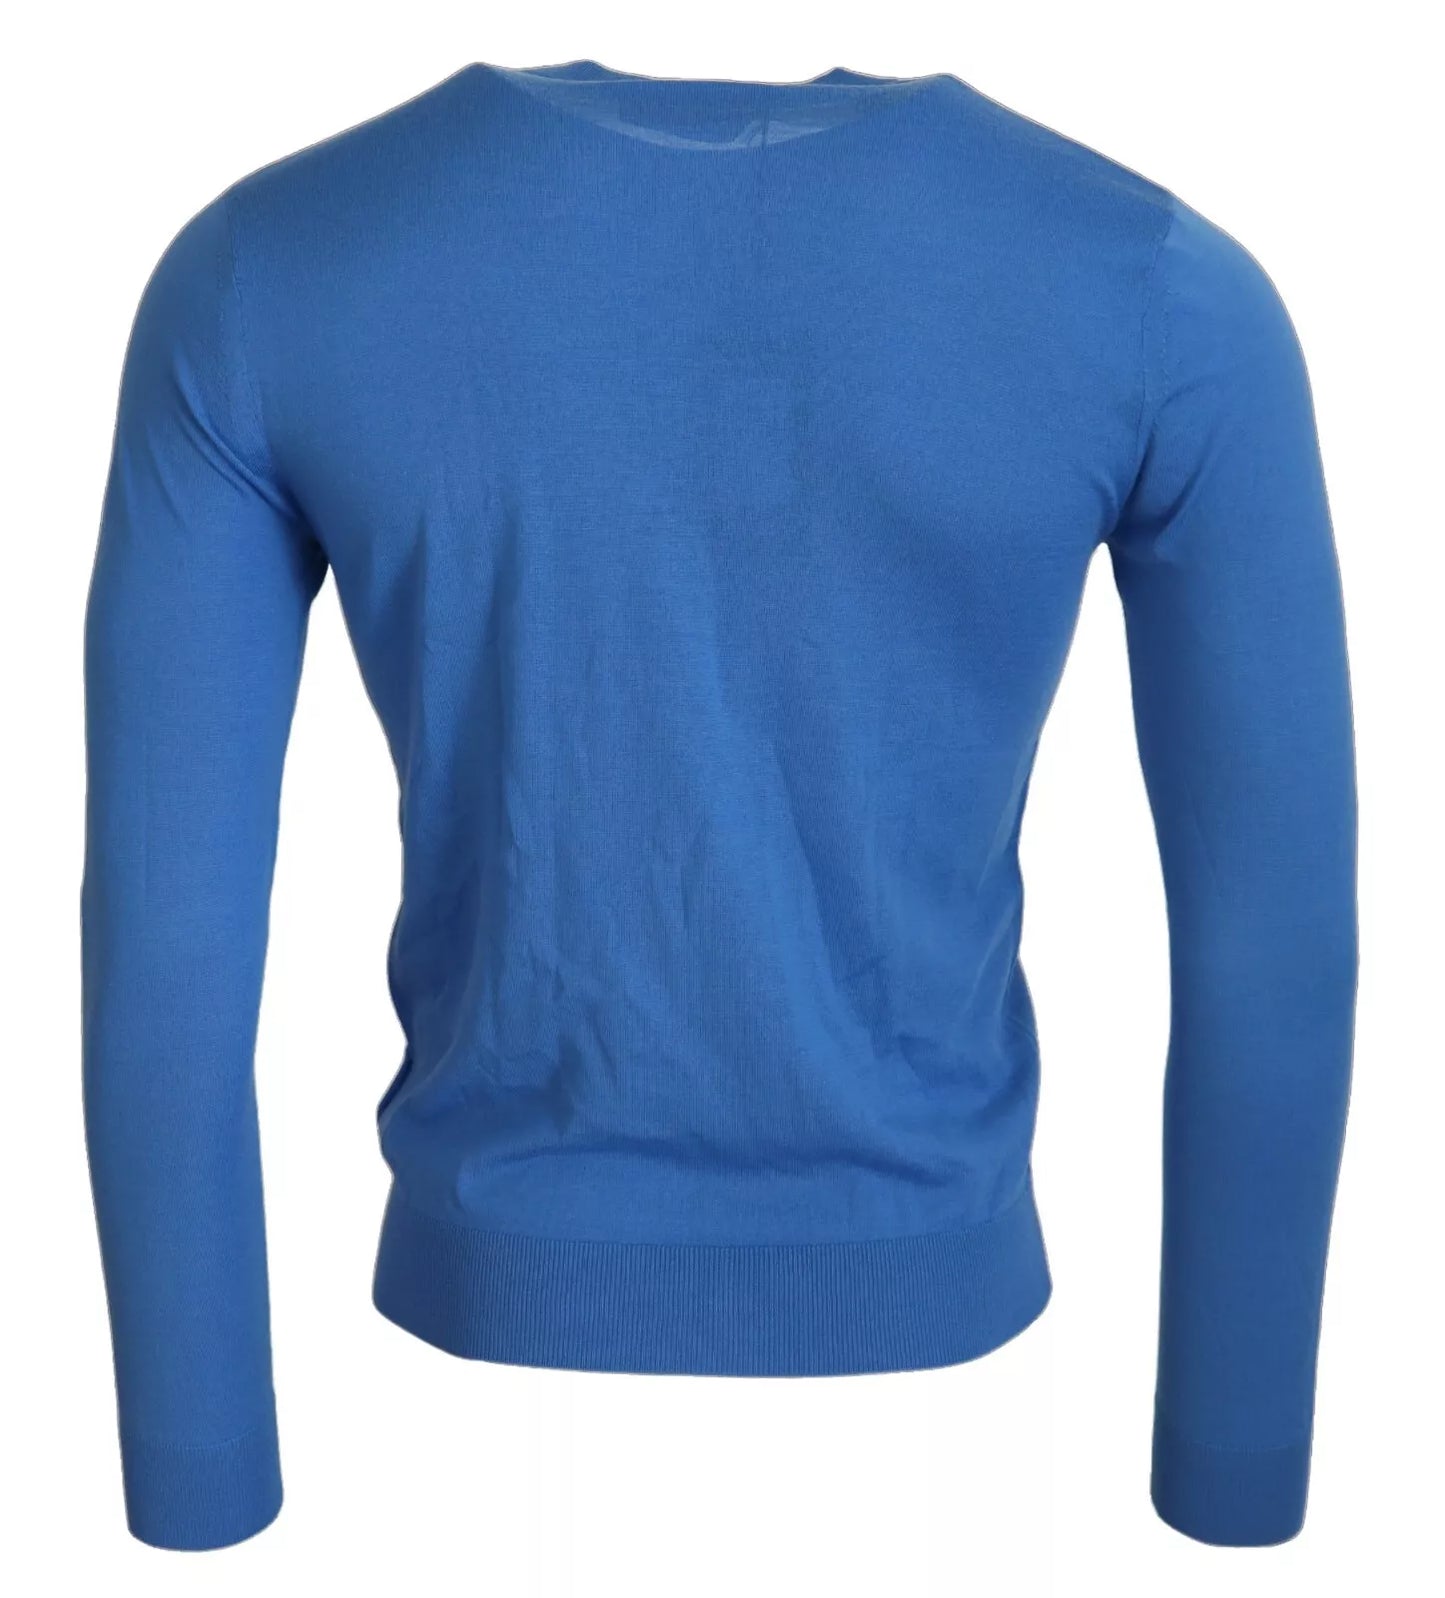 Blue Wool Long Sleeves Crewneck Pullover Sweater